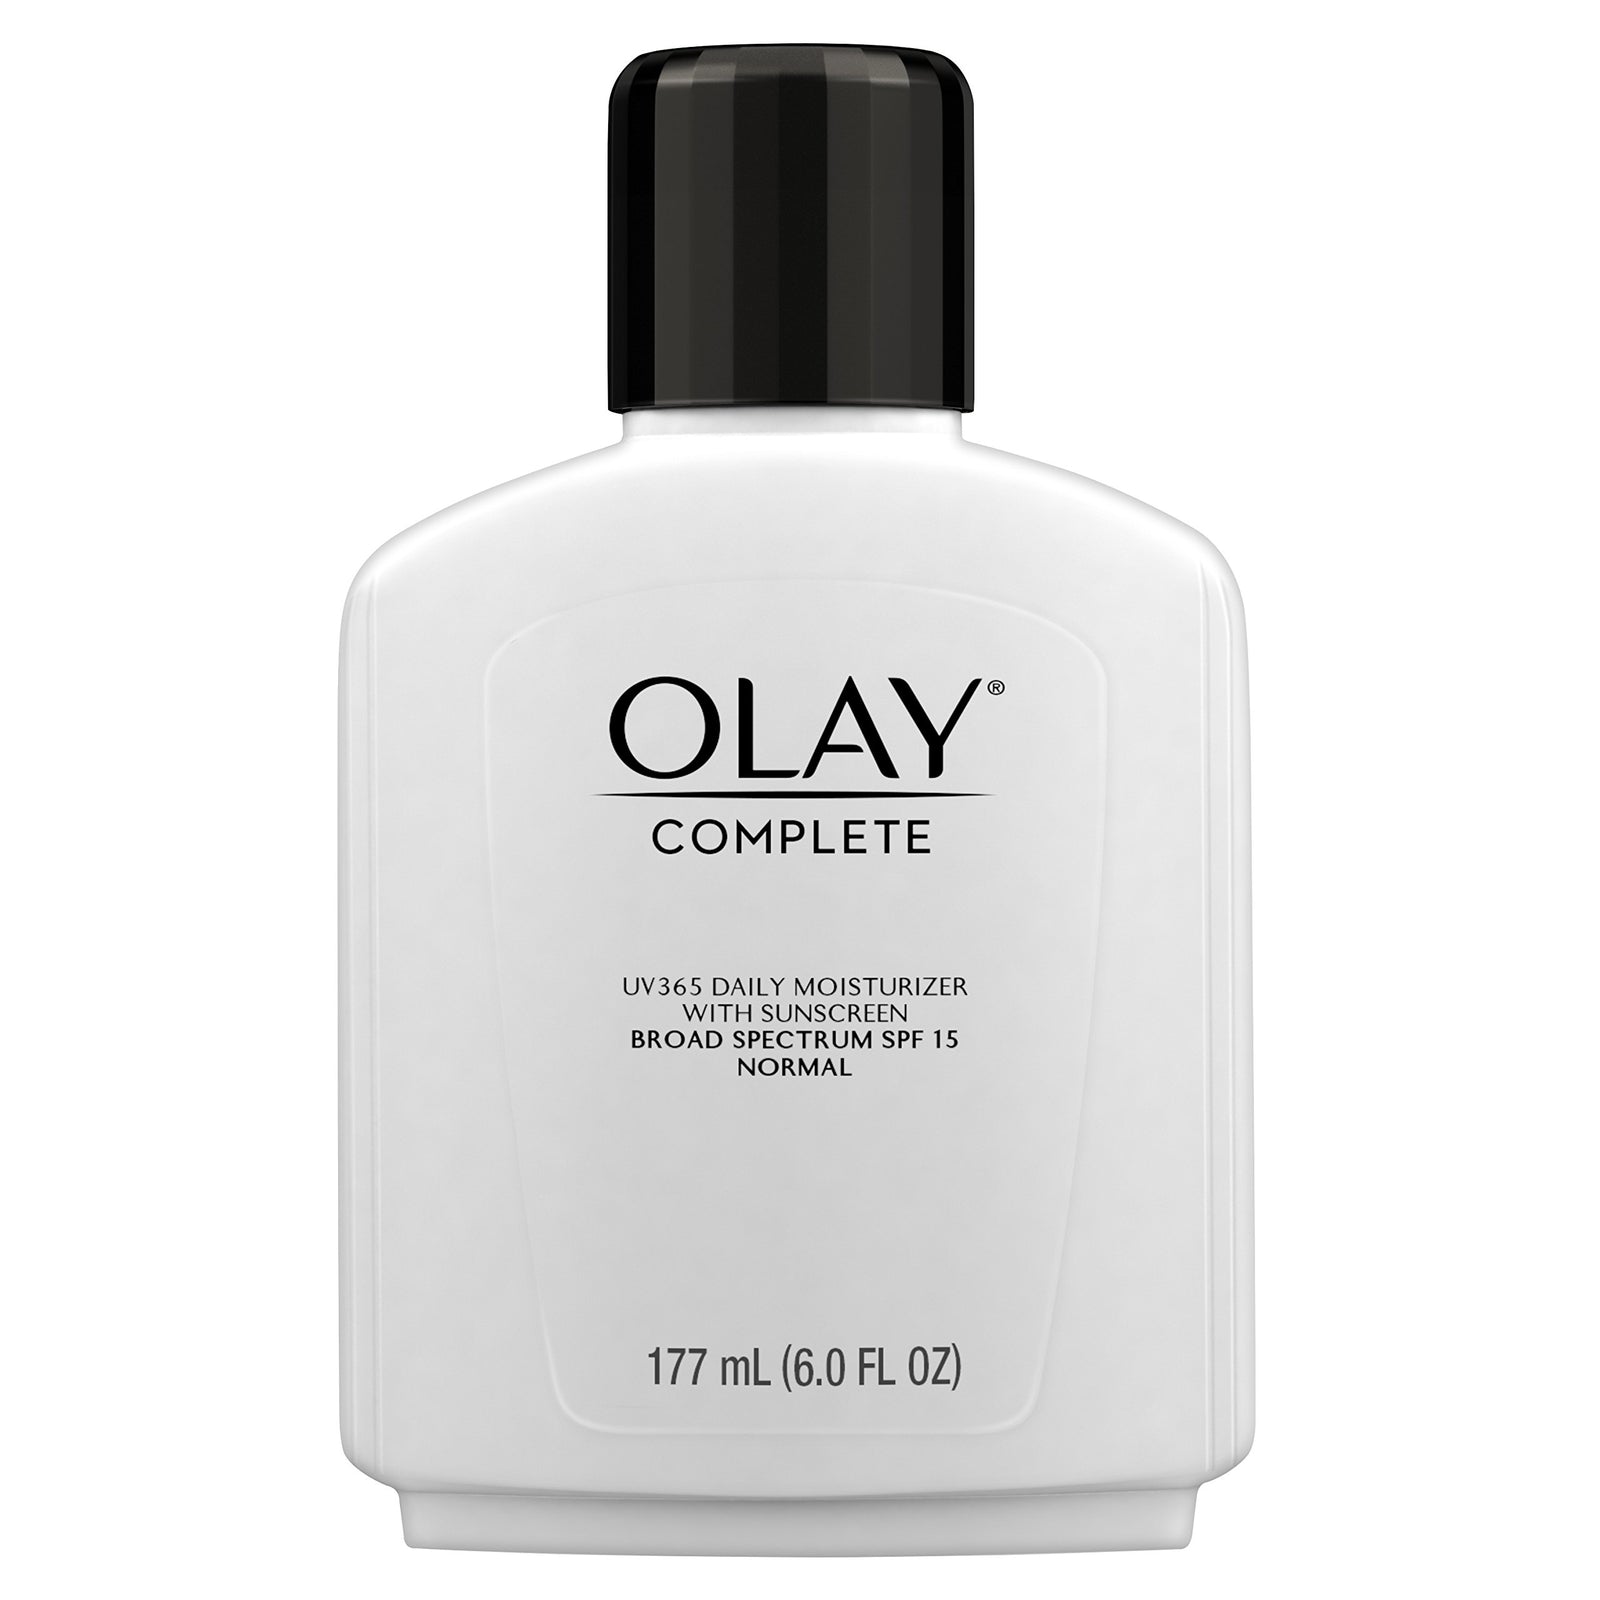 Olay Complete Daily Moisturizer with Sunscreen, Normal, 6